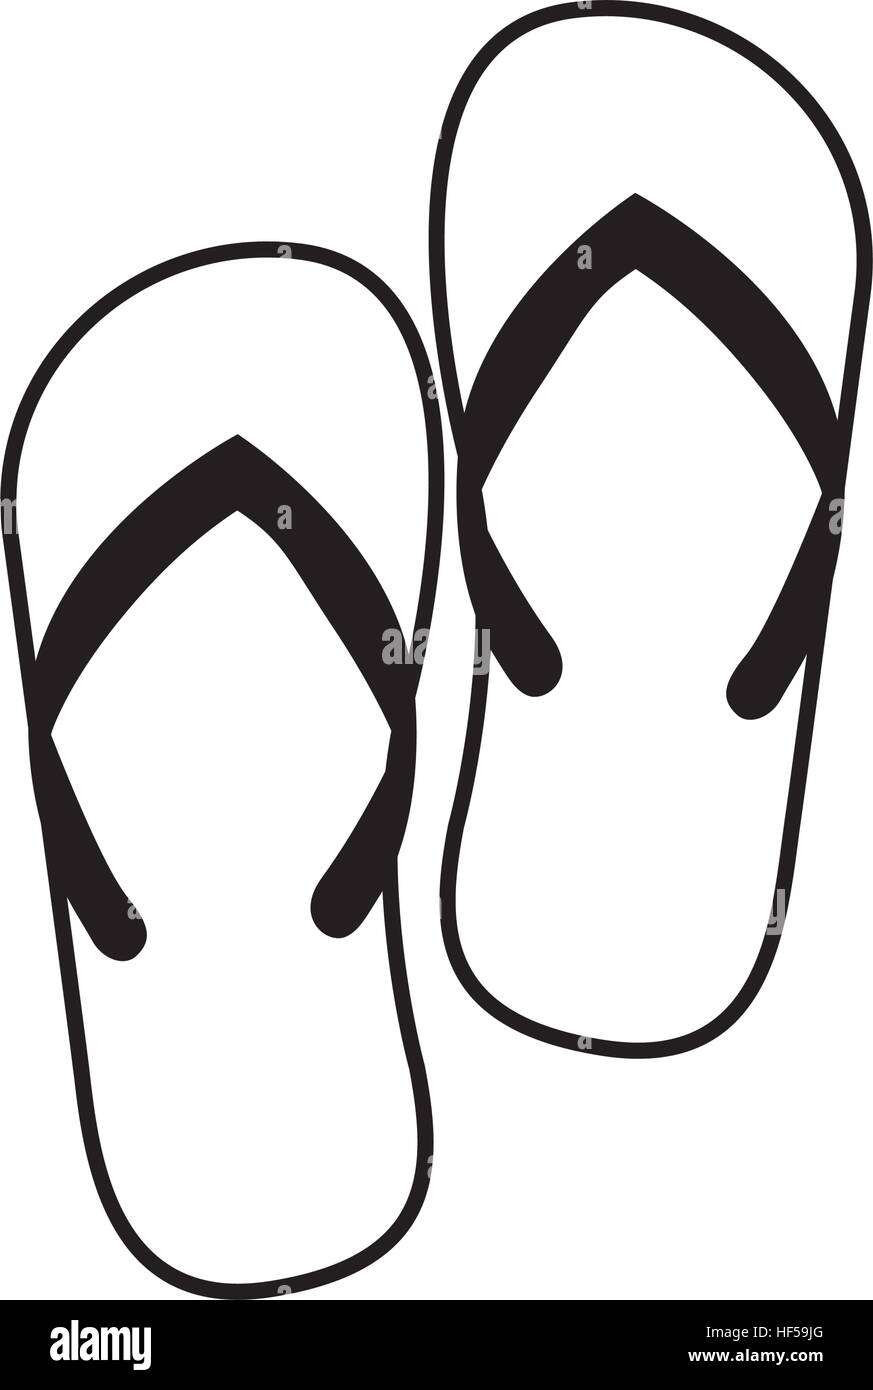 Sandals icon. Shoes fashion footwear beuty and beach theme. Isolated design. Vector illustration Stock Vector